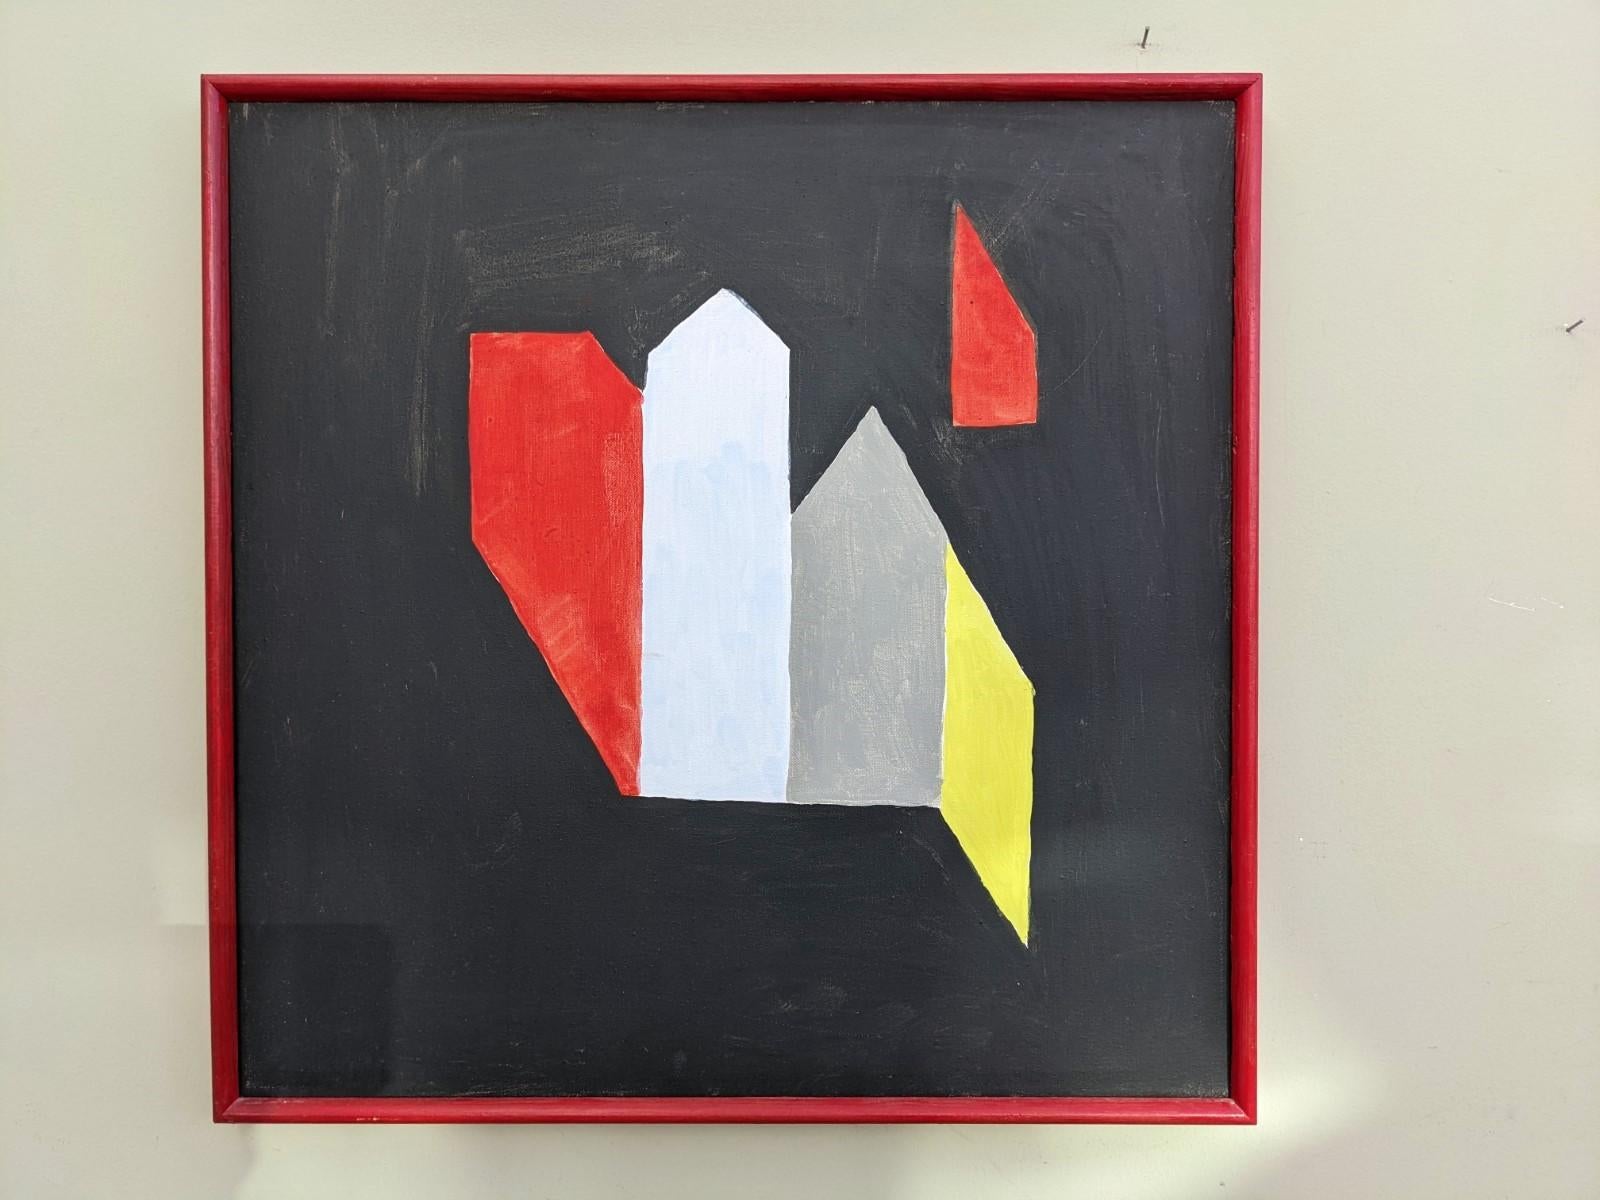 DIMENSION
Size: 52 x 52 cm (including frame)
Oil on canvas

A simple yet very effective abstract composition in oil, painted onto canvas.

A set of bright abstract forms sit against a black background, teasing our eyes into an optical illusion.